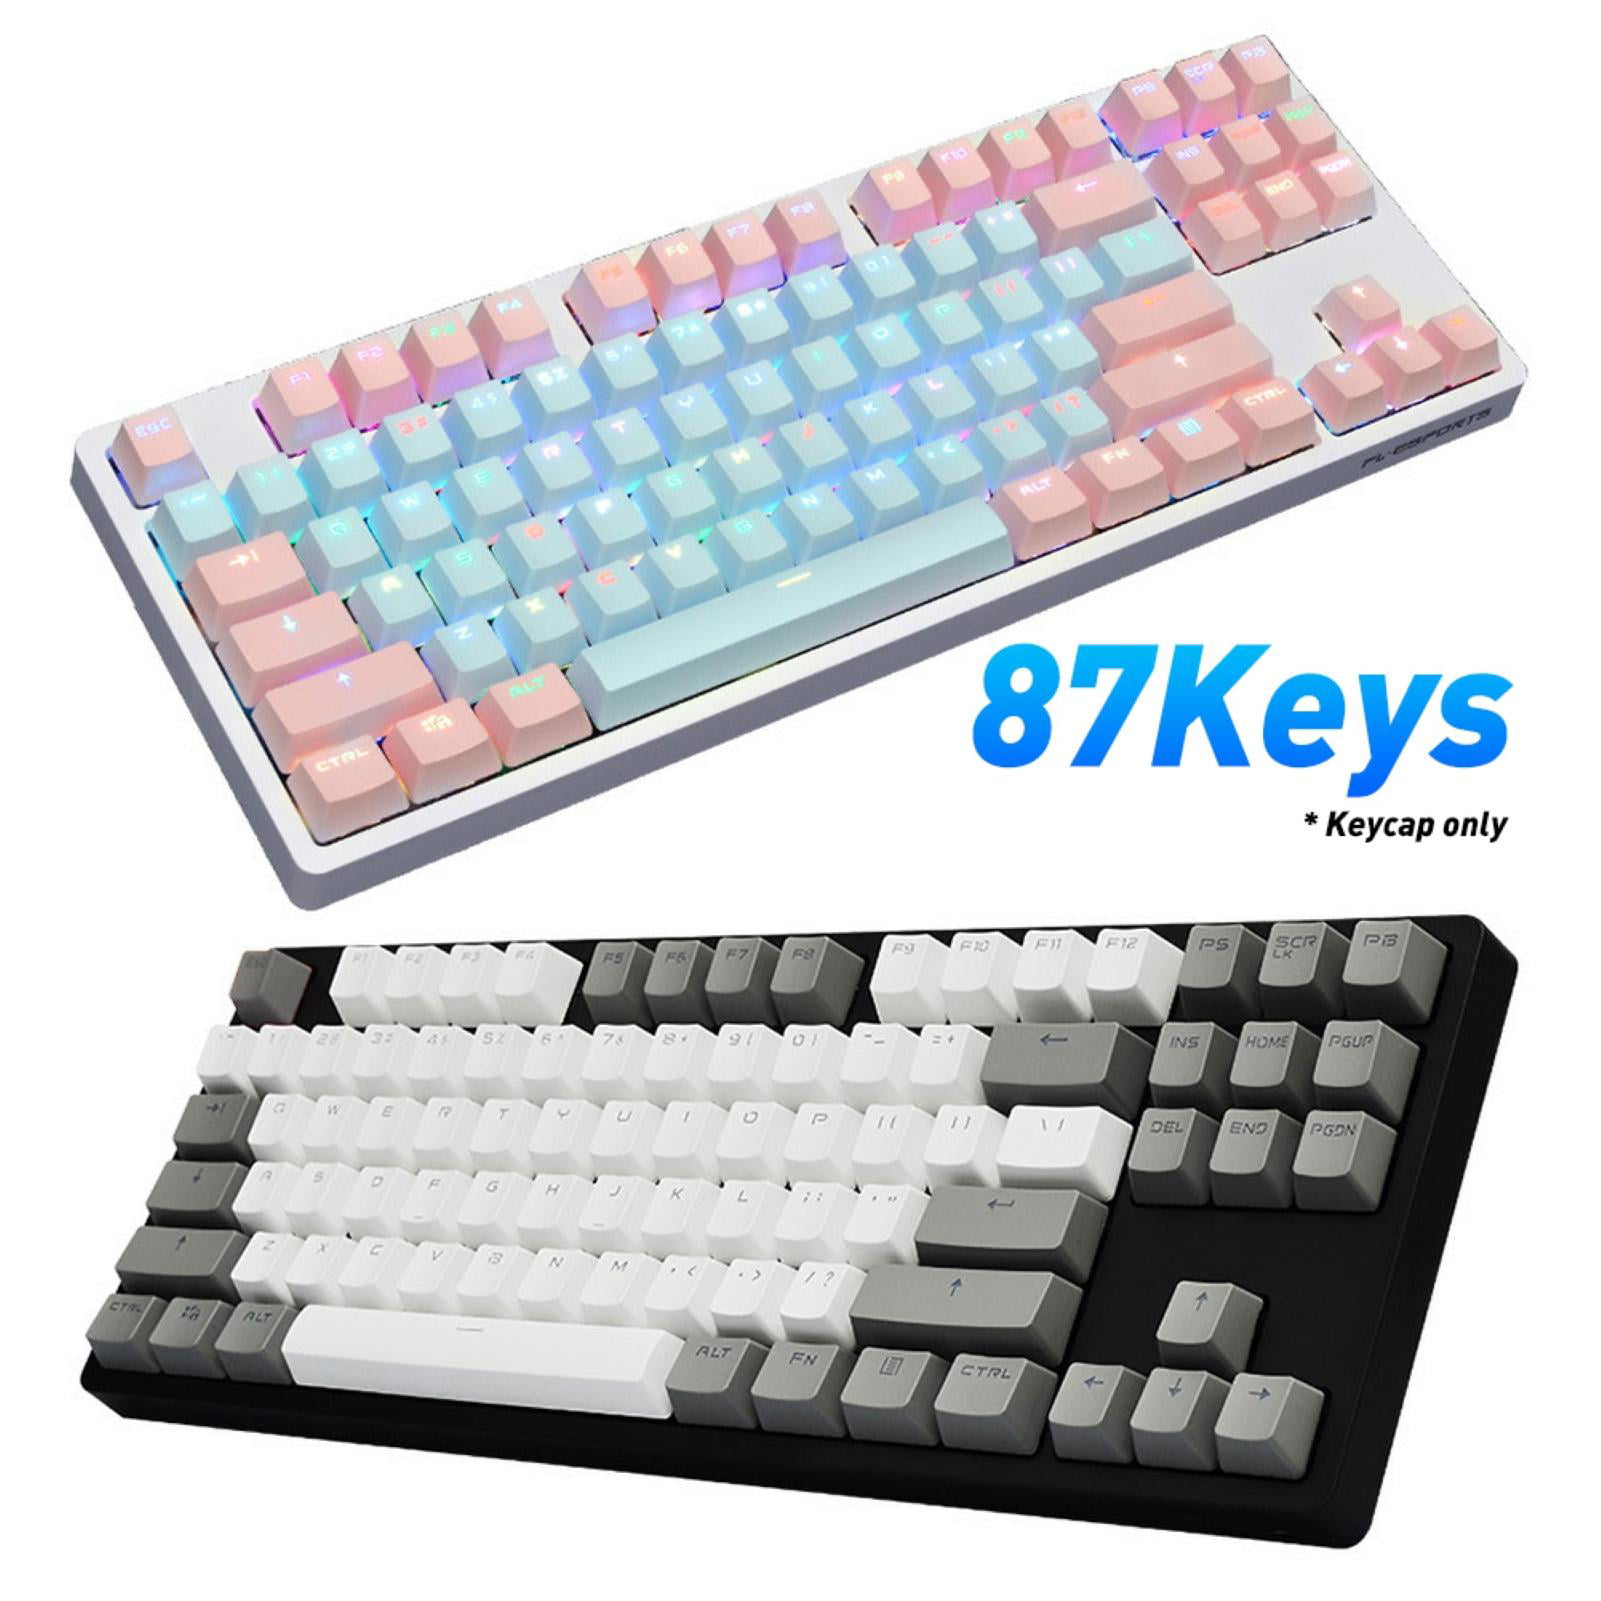 104Pcs Keycaps Cover for Full Size Keyboards Dual Color PBT Key Covers Replacement Keyboard Accessory for PC Game Console Pink-White